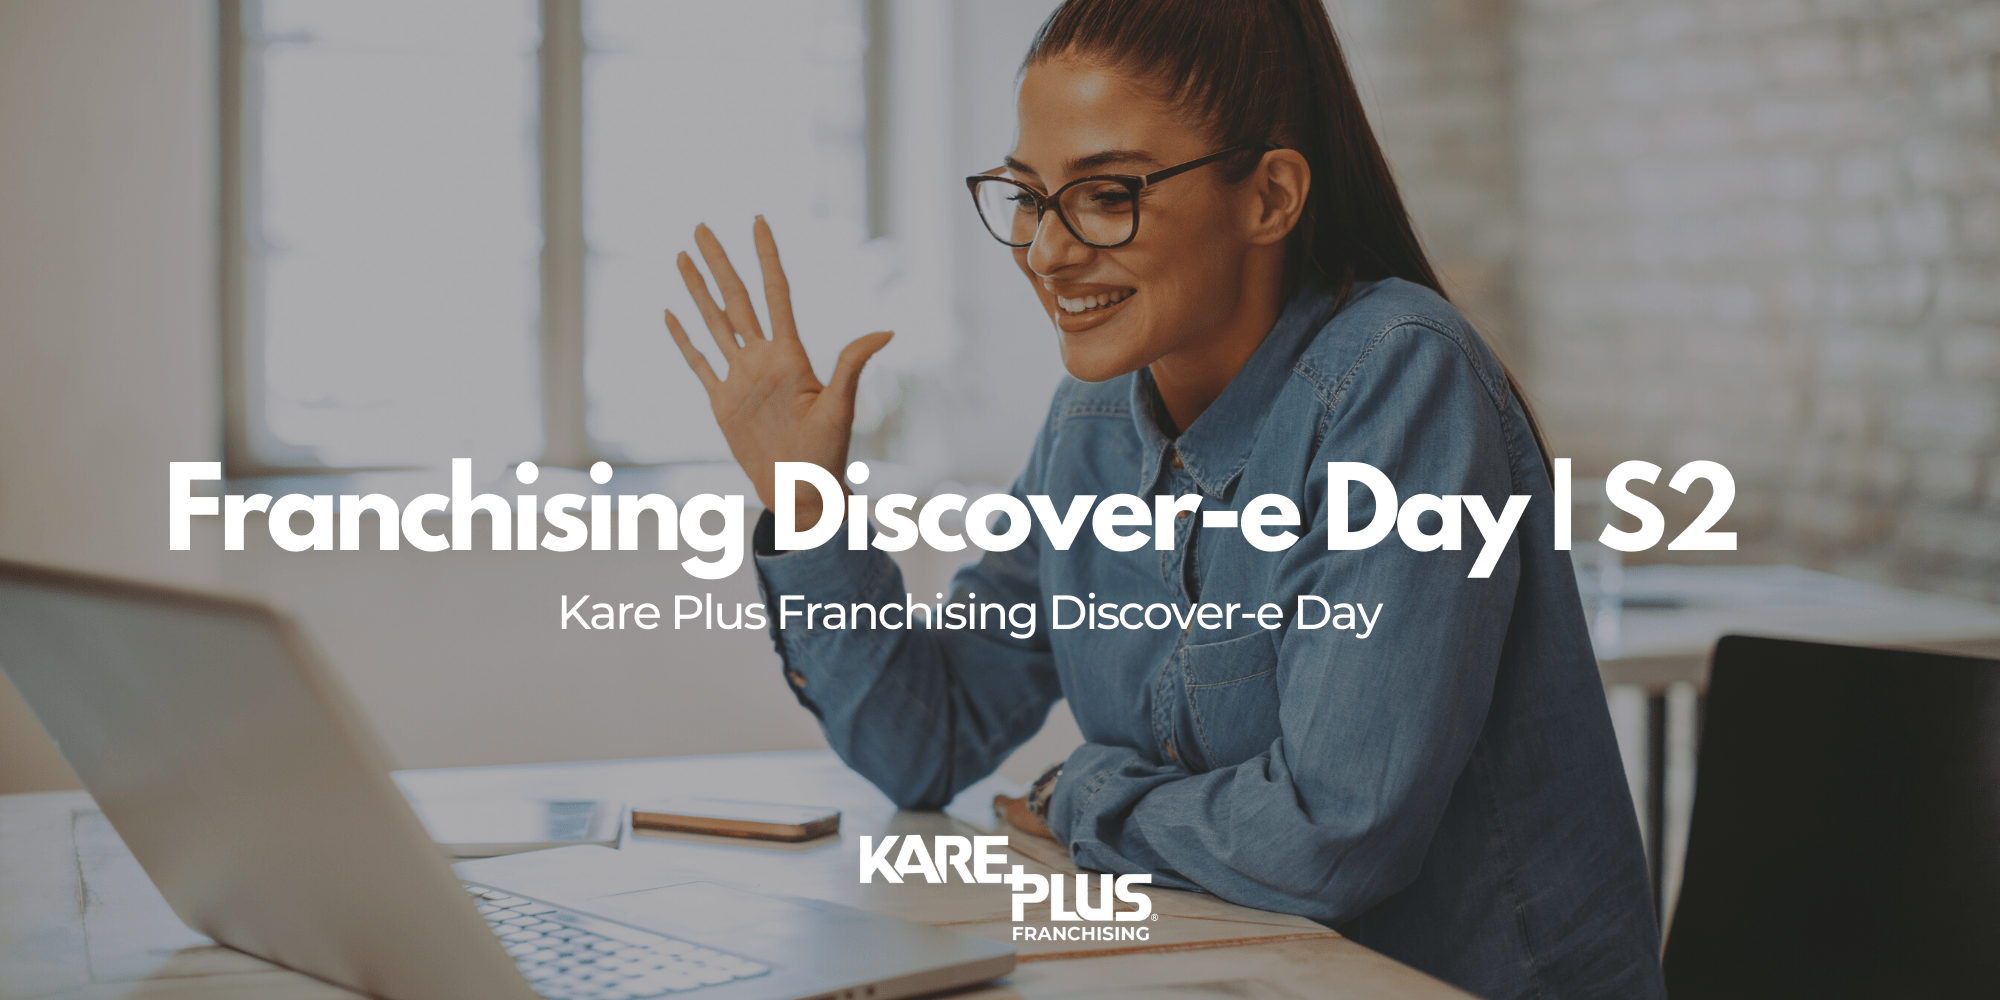 Discover Kare Plus Franchising from the comfort of your own home